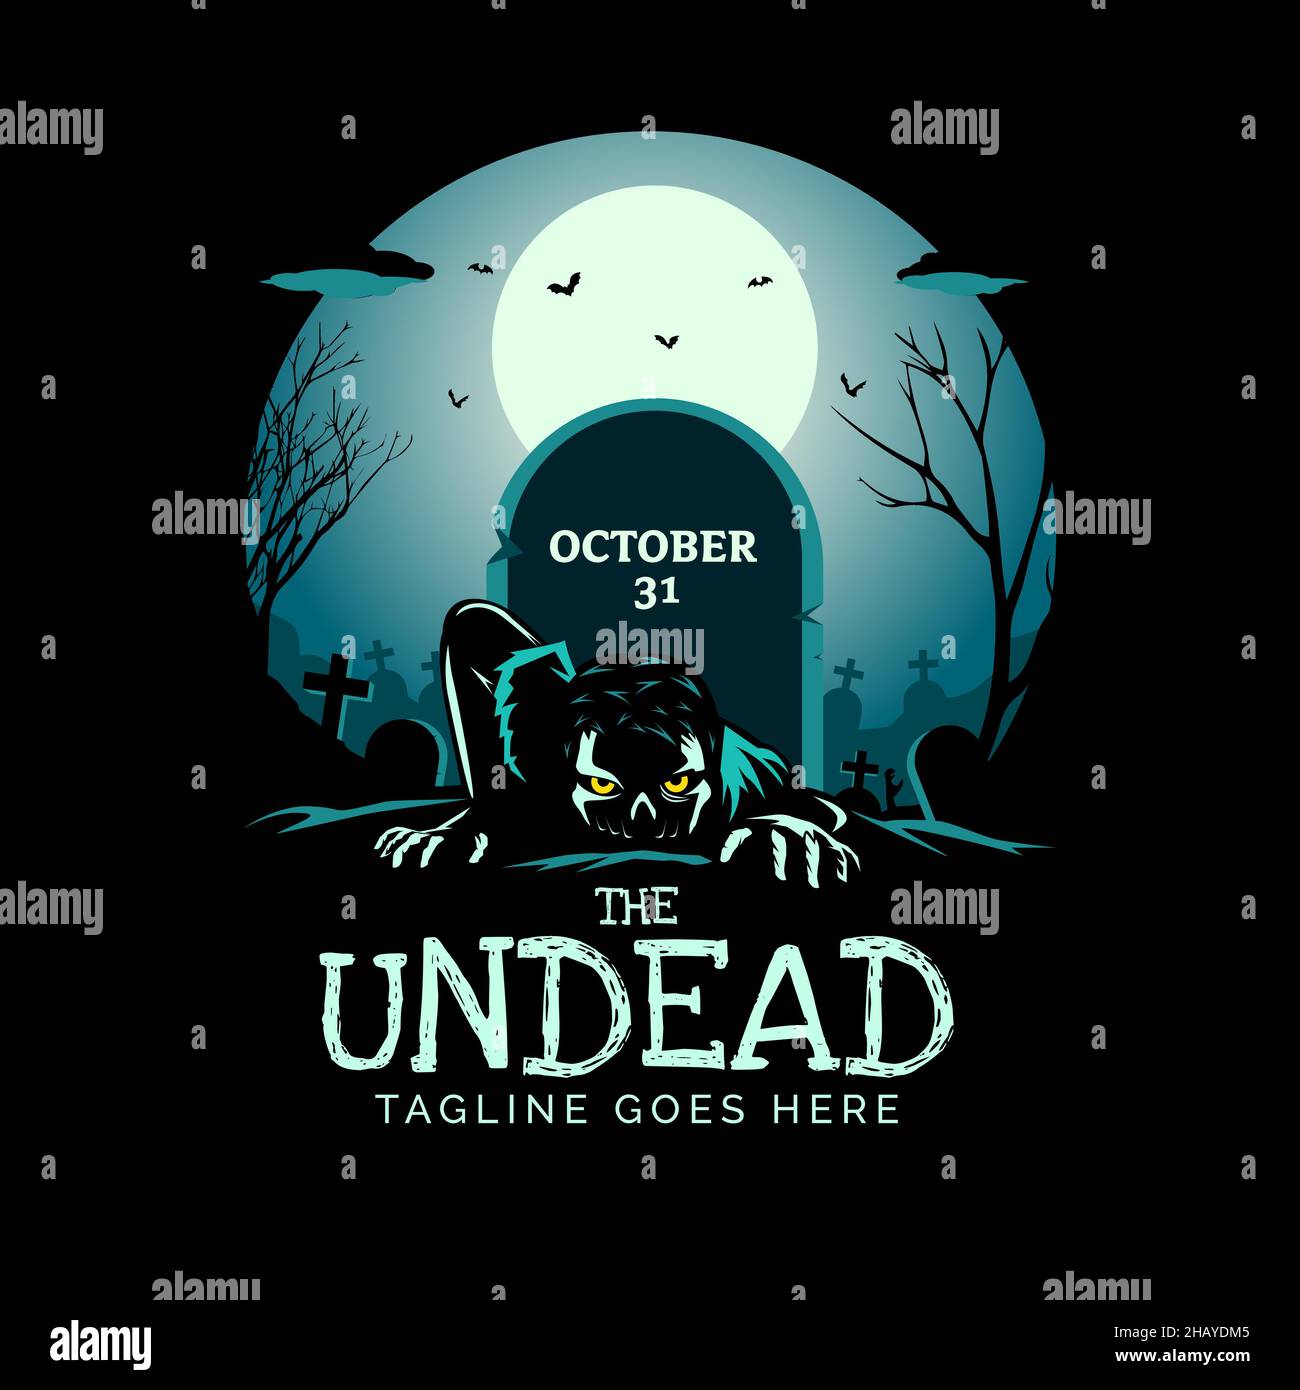 the Undead zombie theme vector illustration can be used as logo, tshirt graphic, or any other purpose Stock Vector